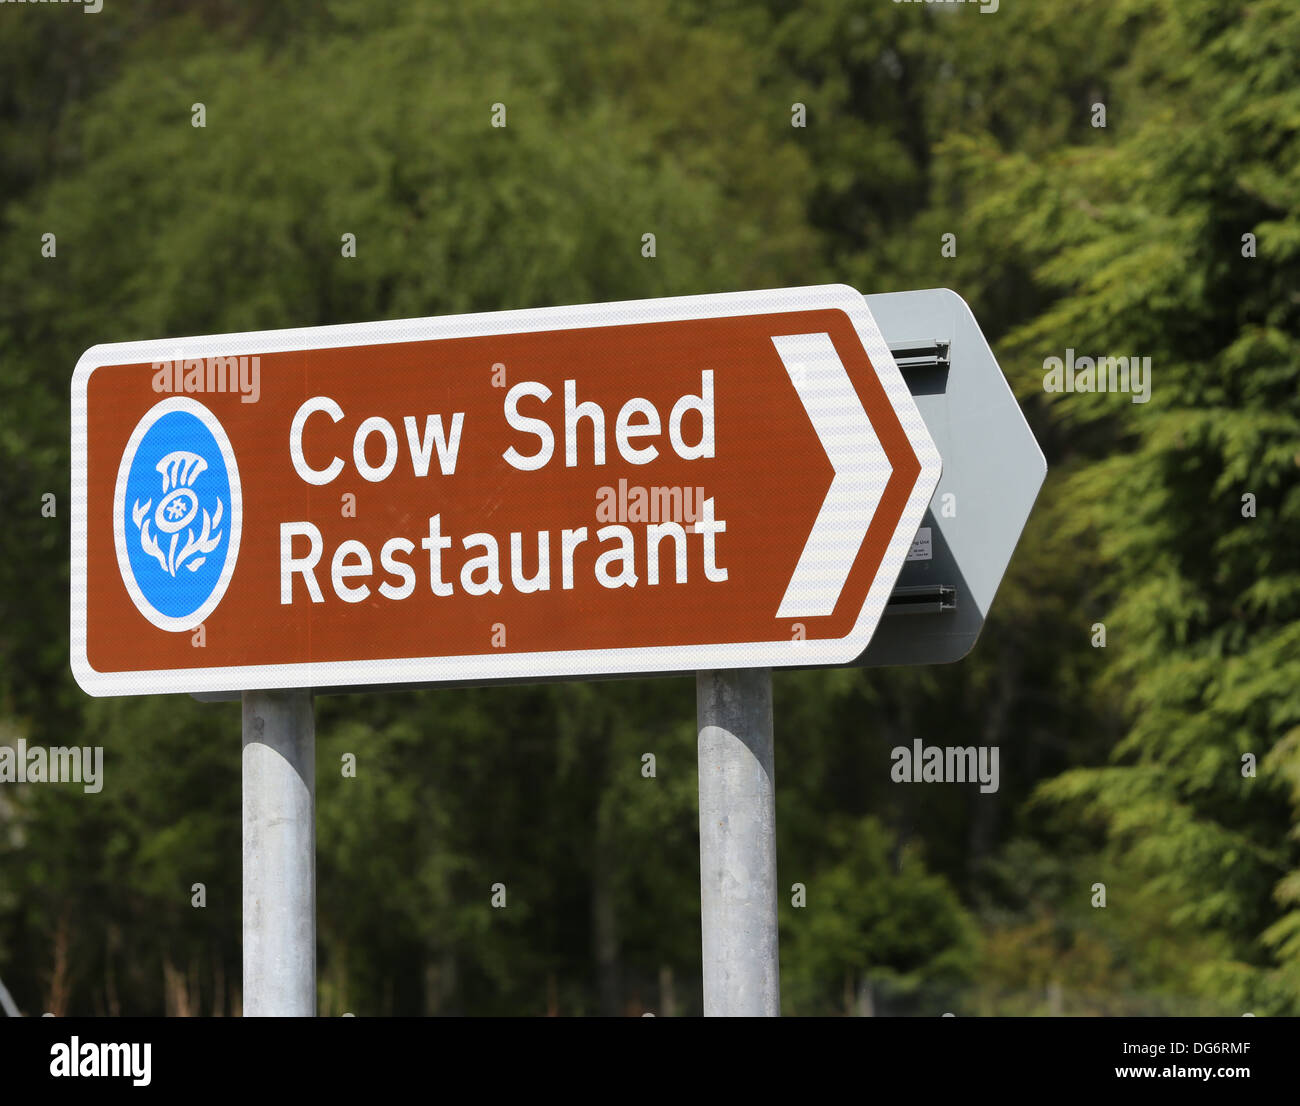 Sign for the Cow Shed restaurant near Banchory, Aberdeenshire, Scotland, UK Stock Photo